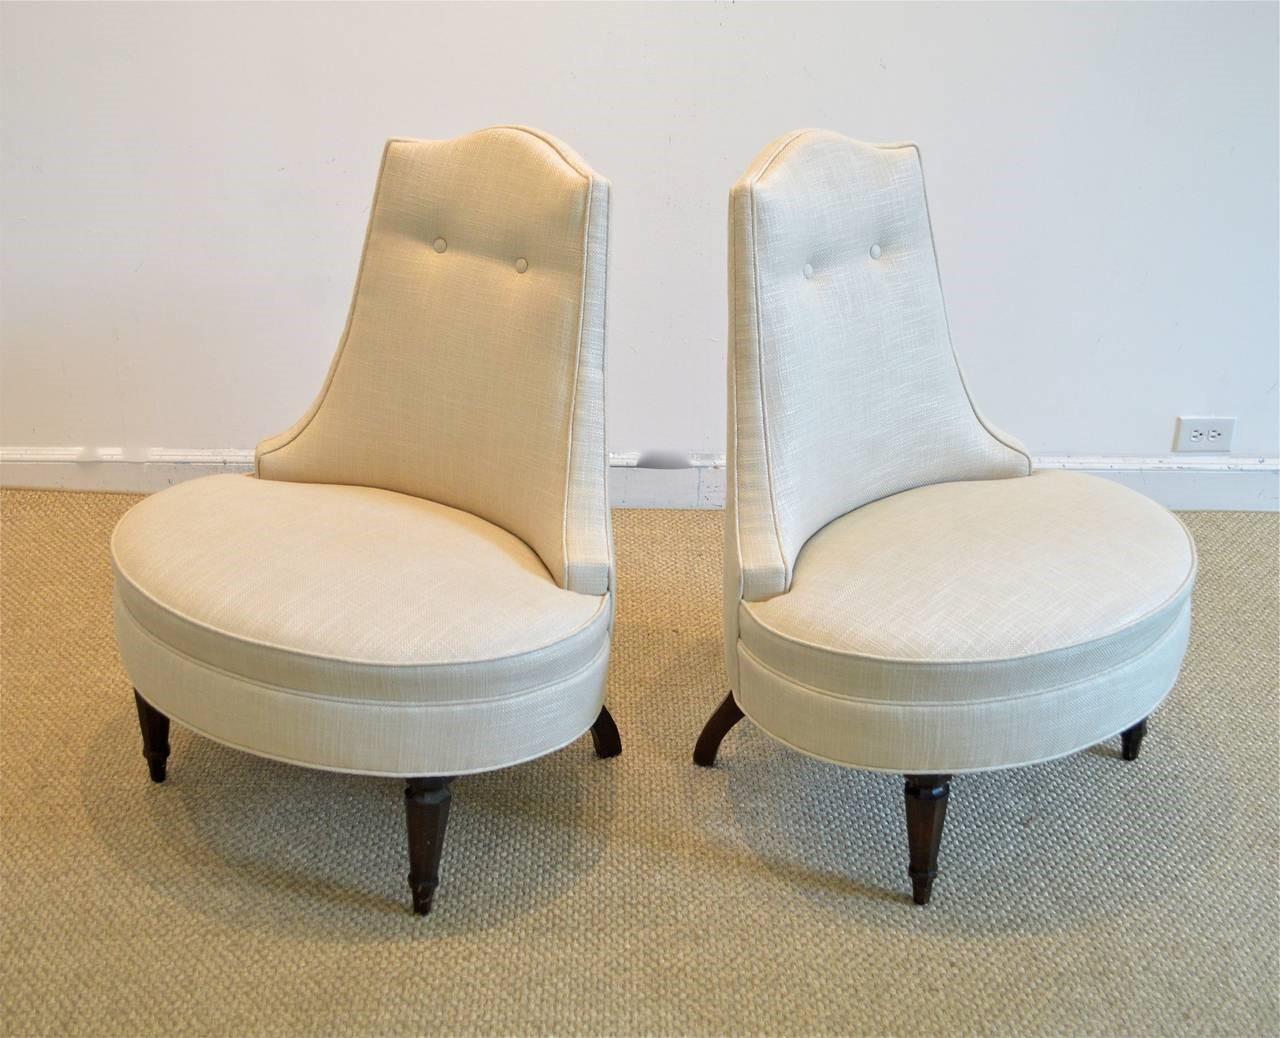 American Pair of Glamorous Hollywood Regency Style Lounge Chairs For Sale